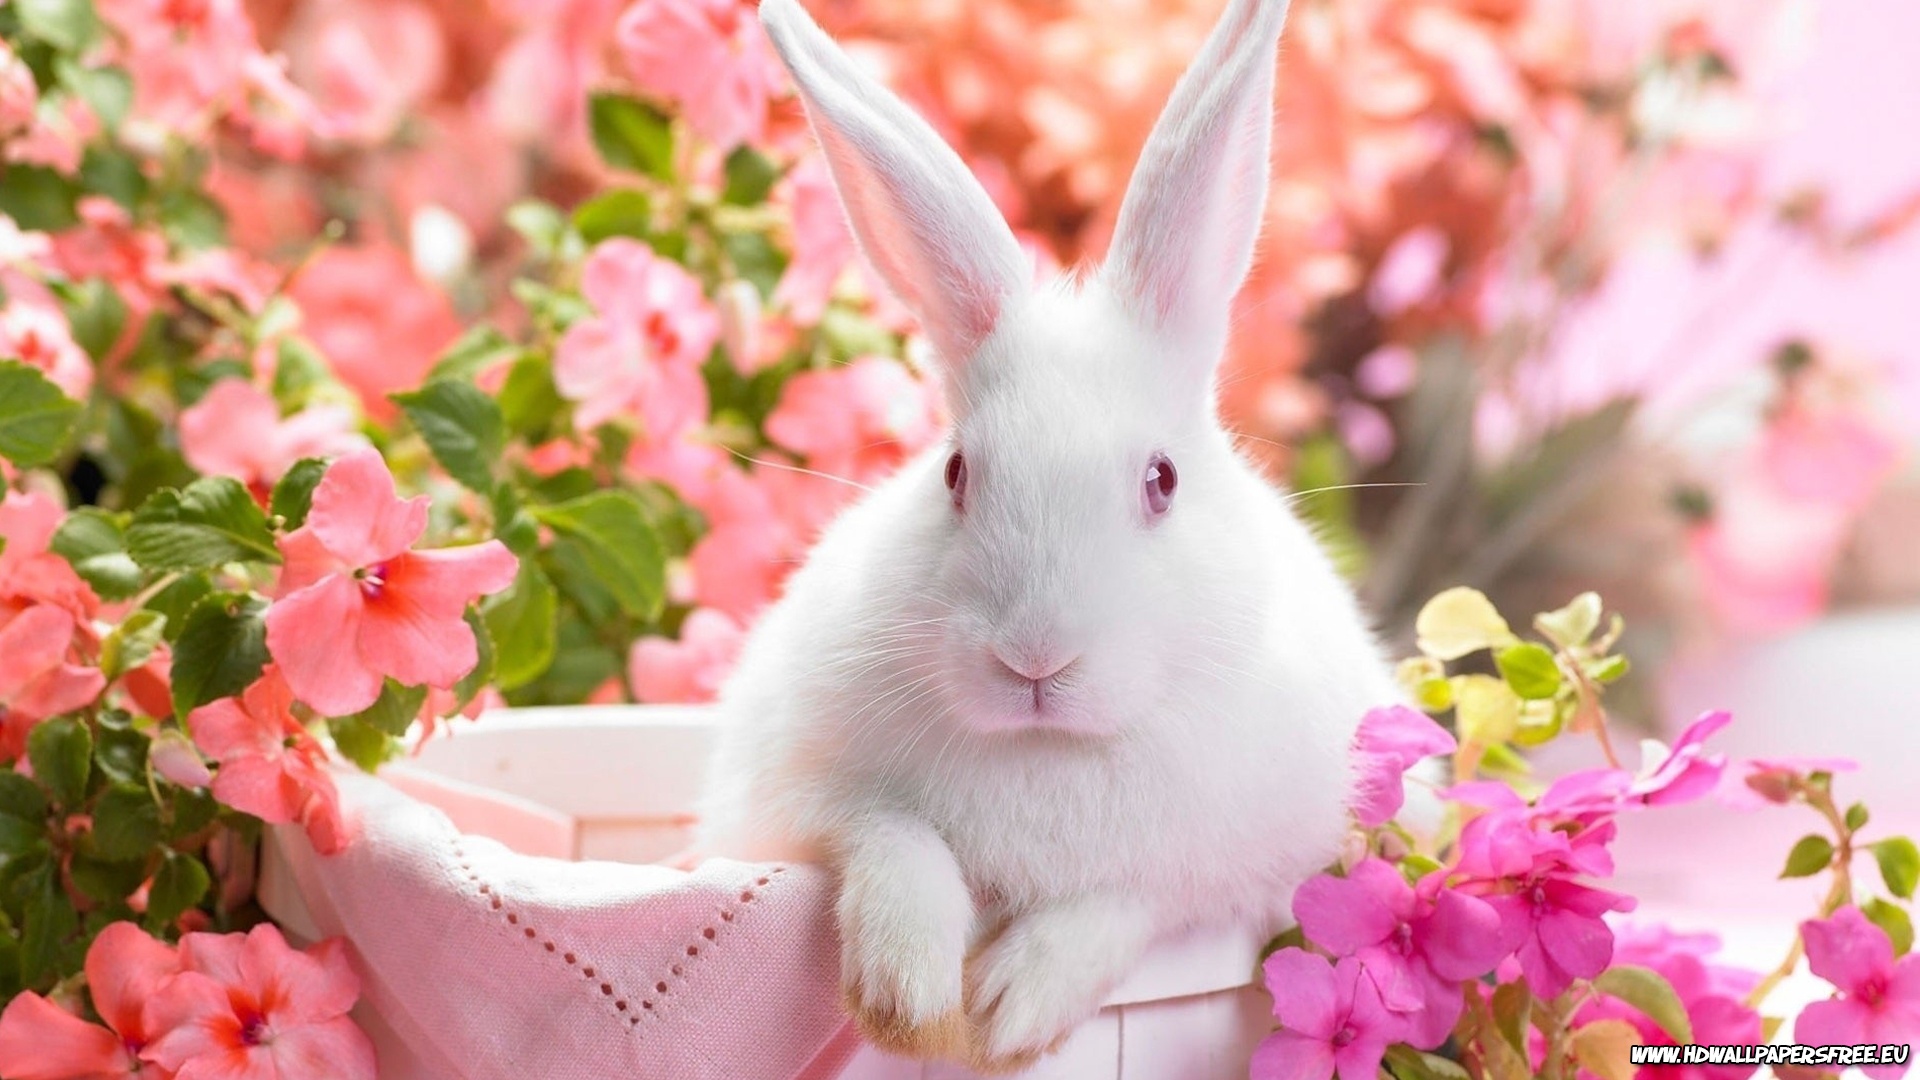 Cute Easter Bunny high definition wallpaper picture